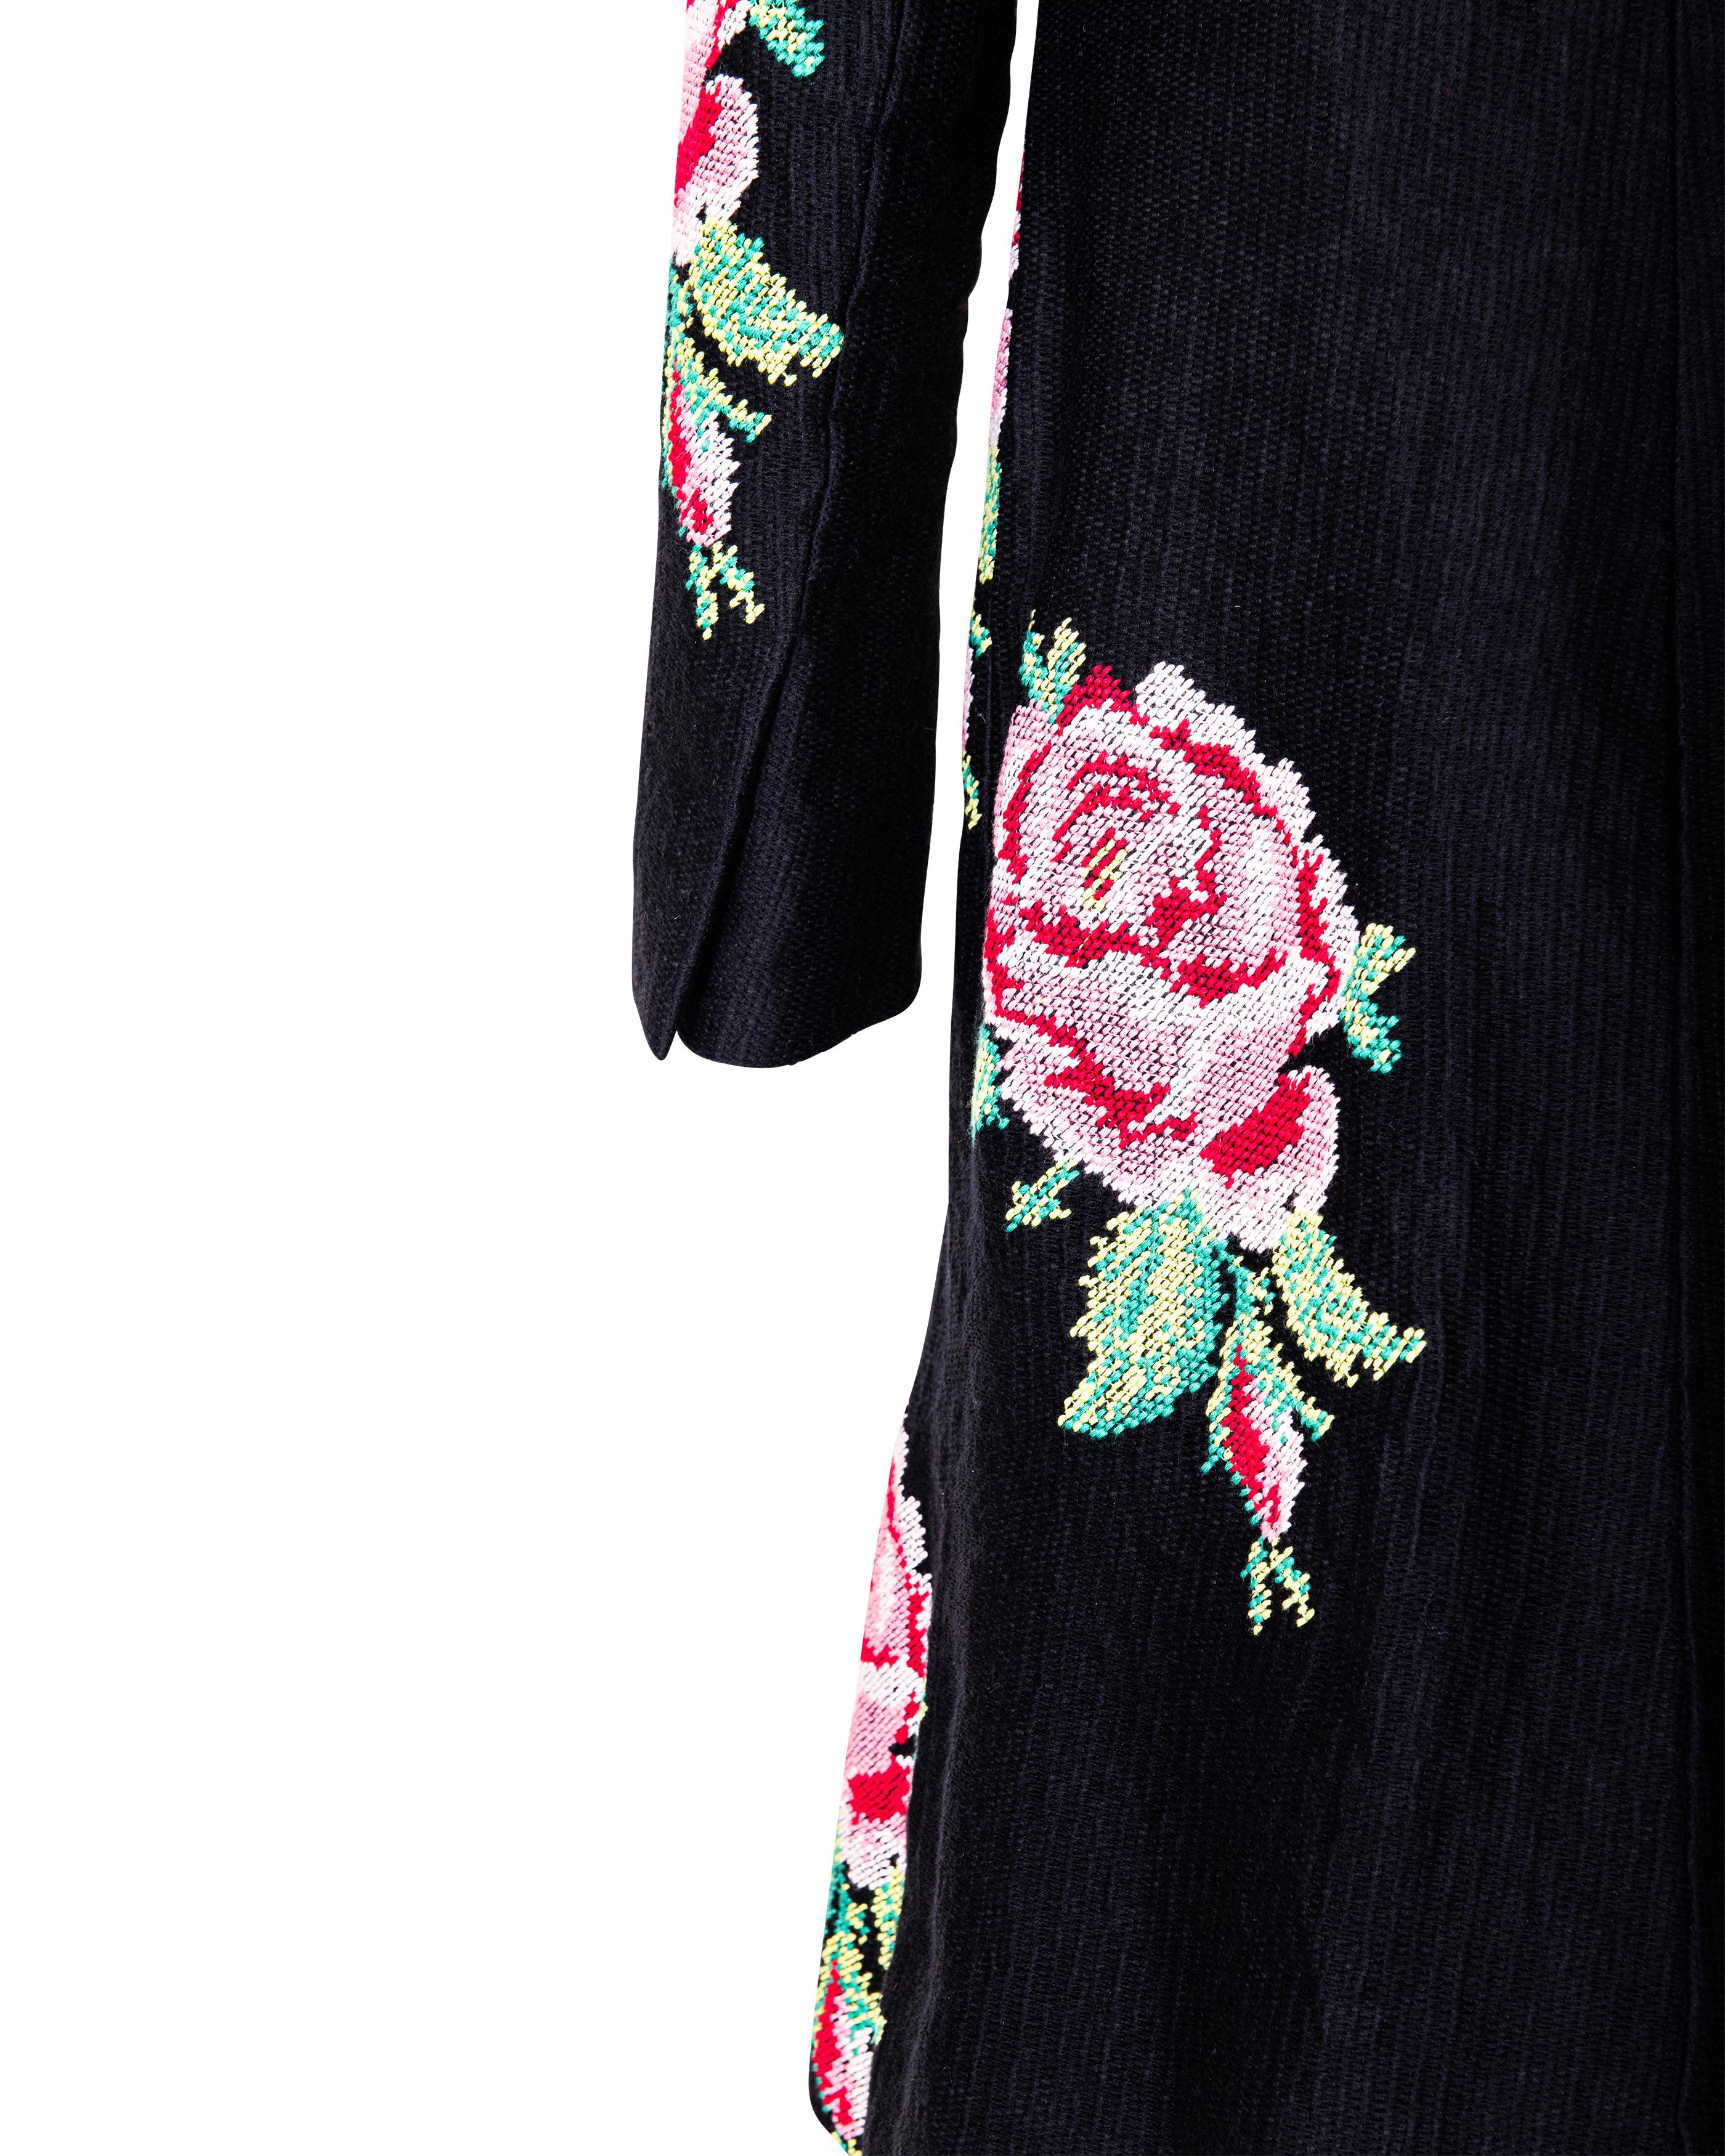 A/W 1996 Givenchy Haute Couture by John Galliano Embroidered Rose Print Coat 3